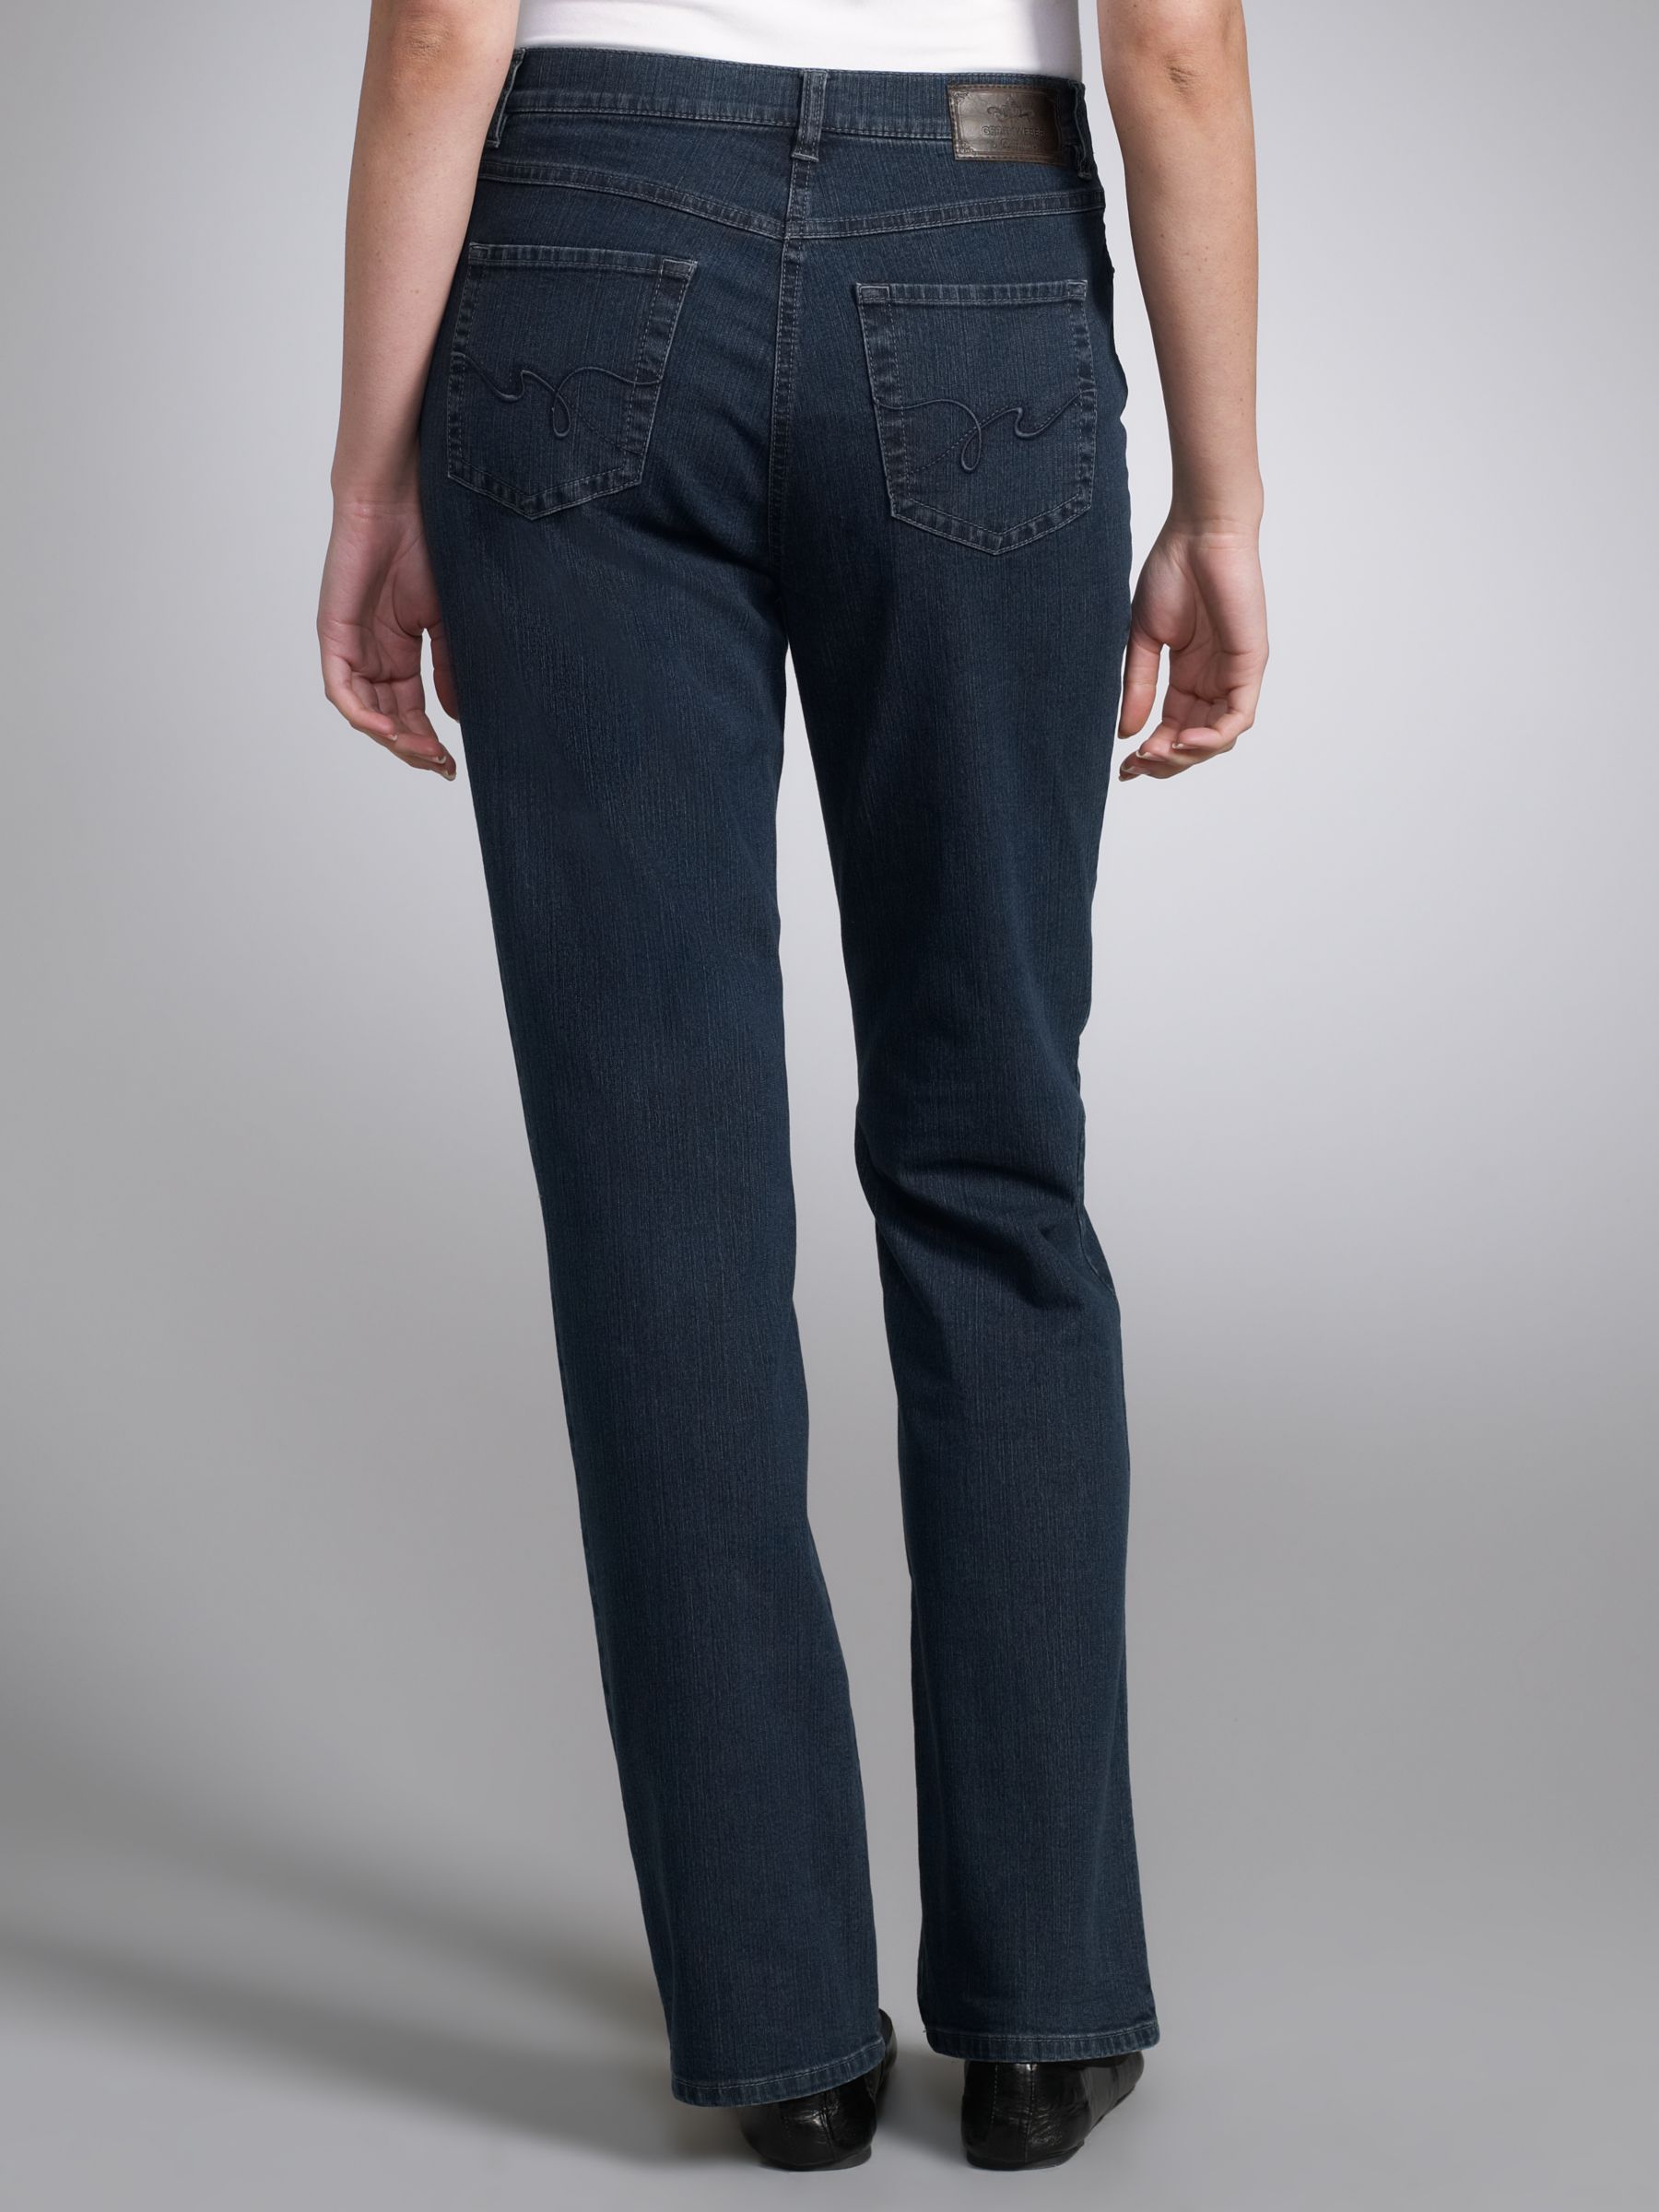 gerry weber edition jeans